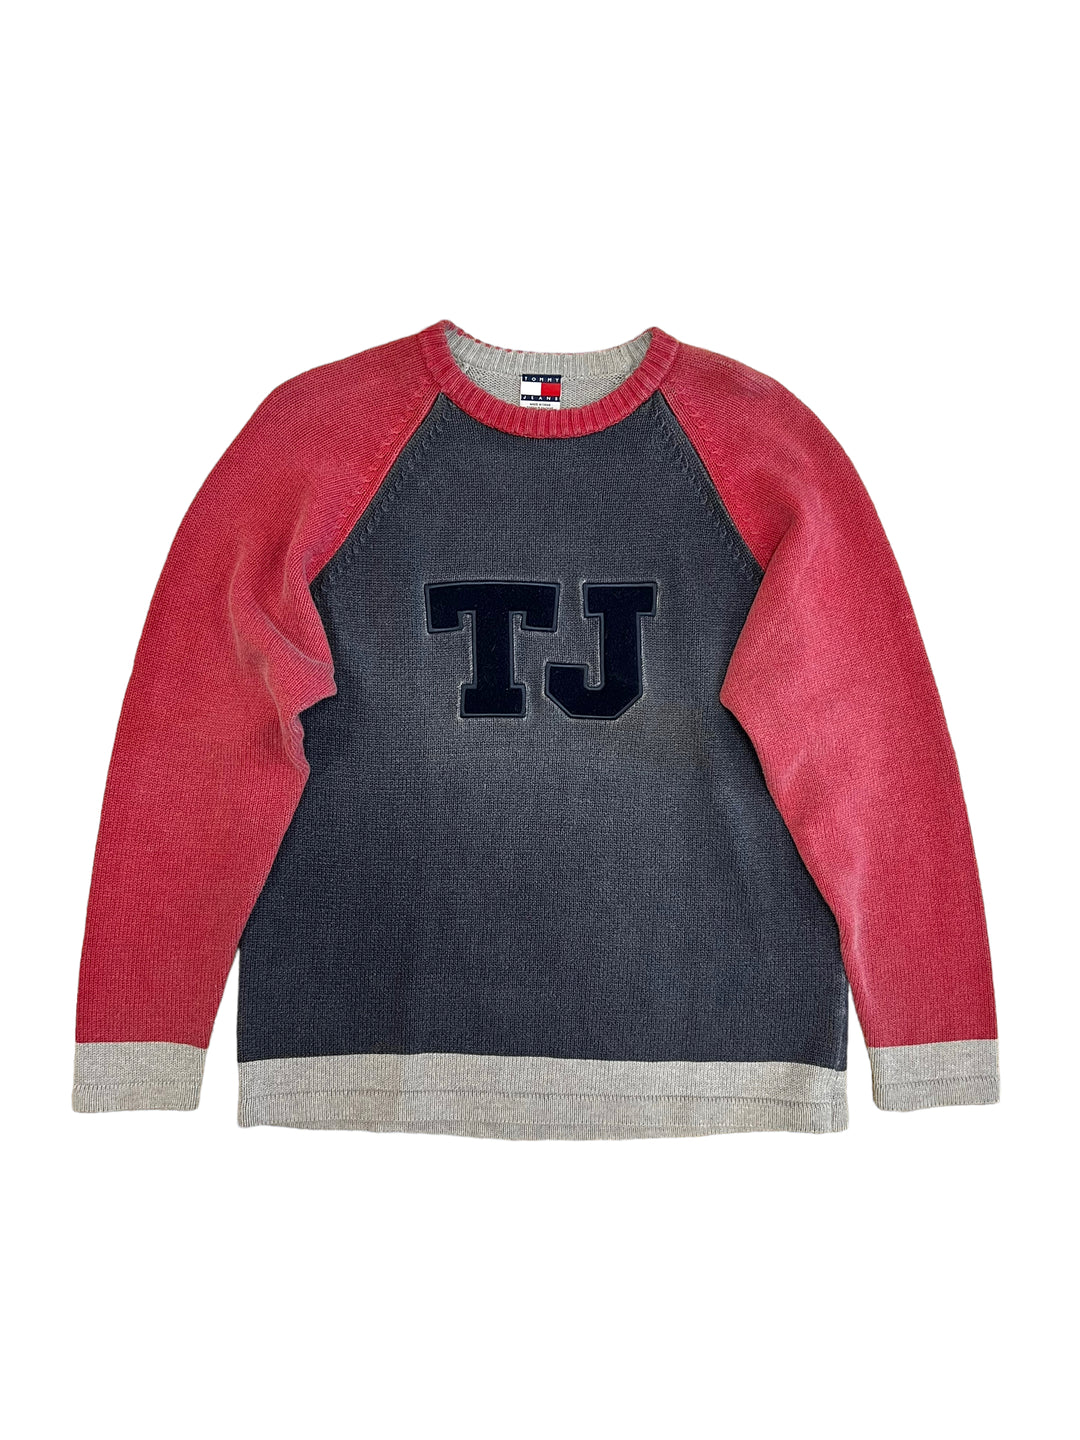 Tommy Jeans Sweater Men’s Oversized Small